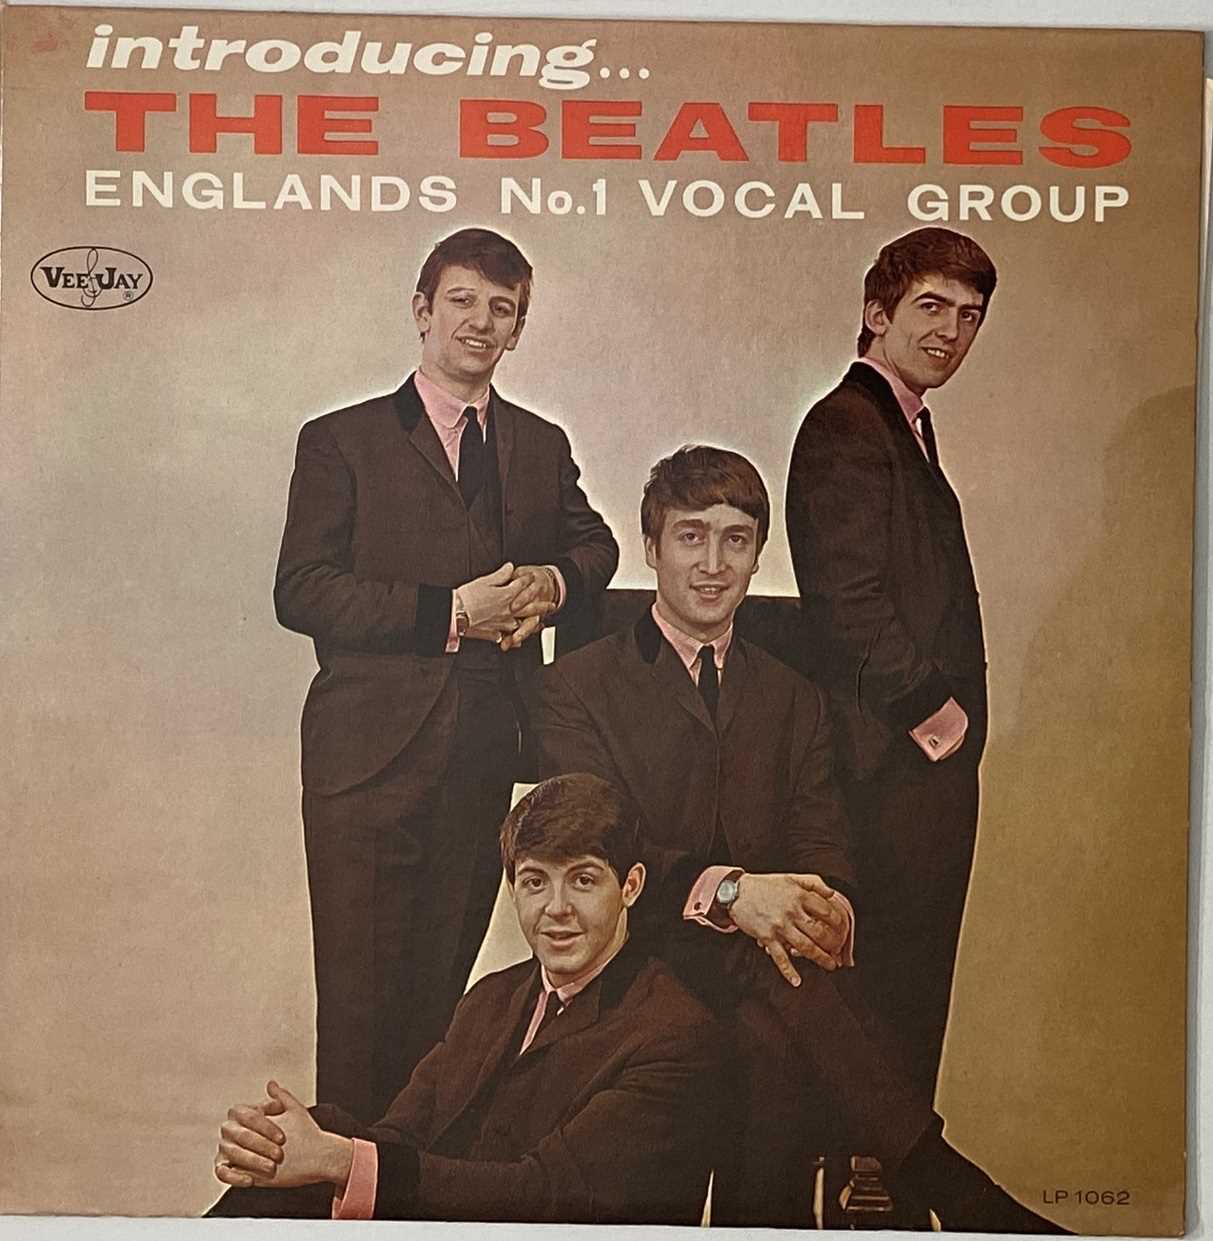 THE BEATLES - LPs/12" - Image 2 of 3